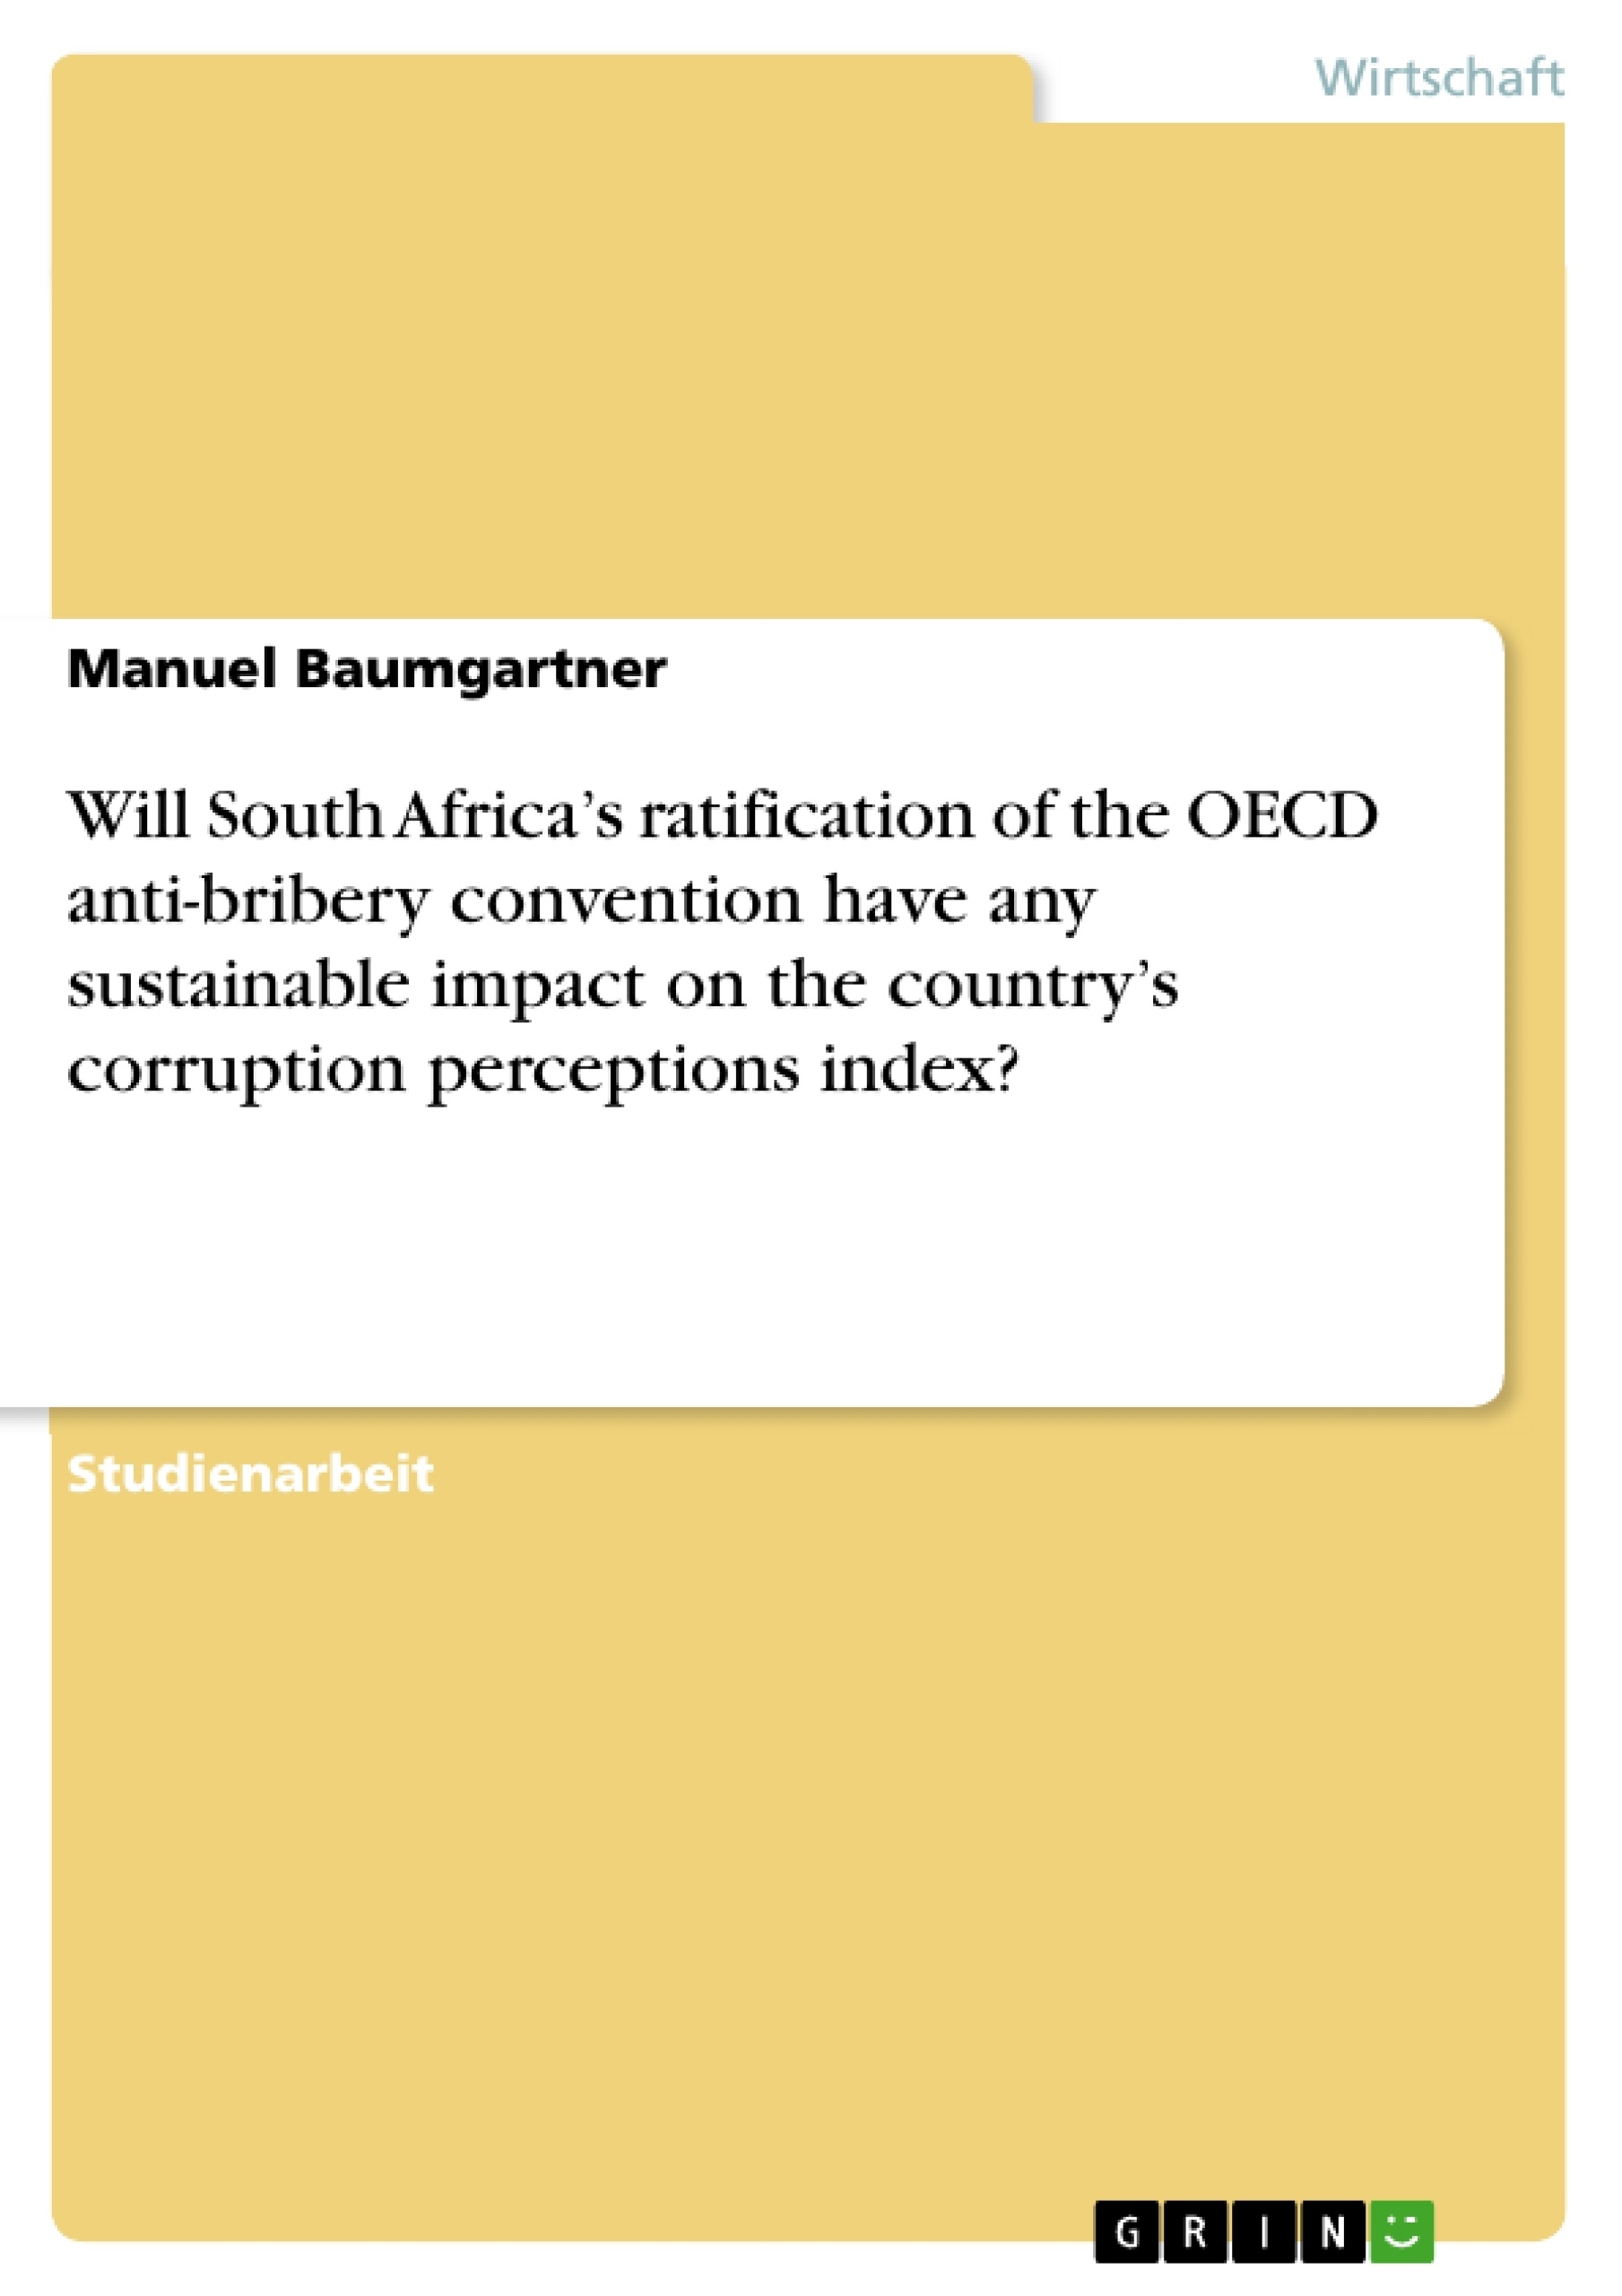 Título: Will South Africa’s ratification of the OECD anti-bribery convention have any sustainable impact on the country’s corruption perceptions index?